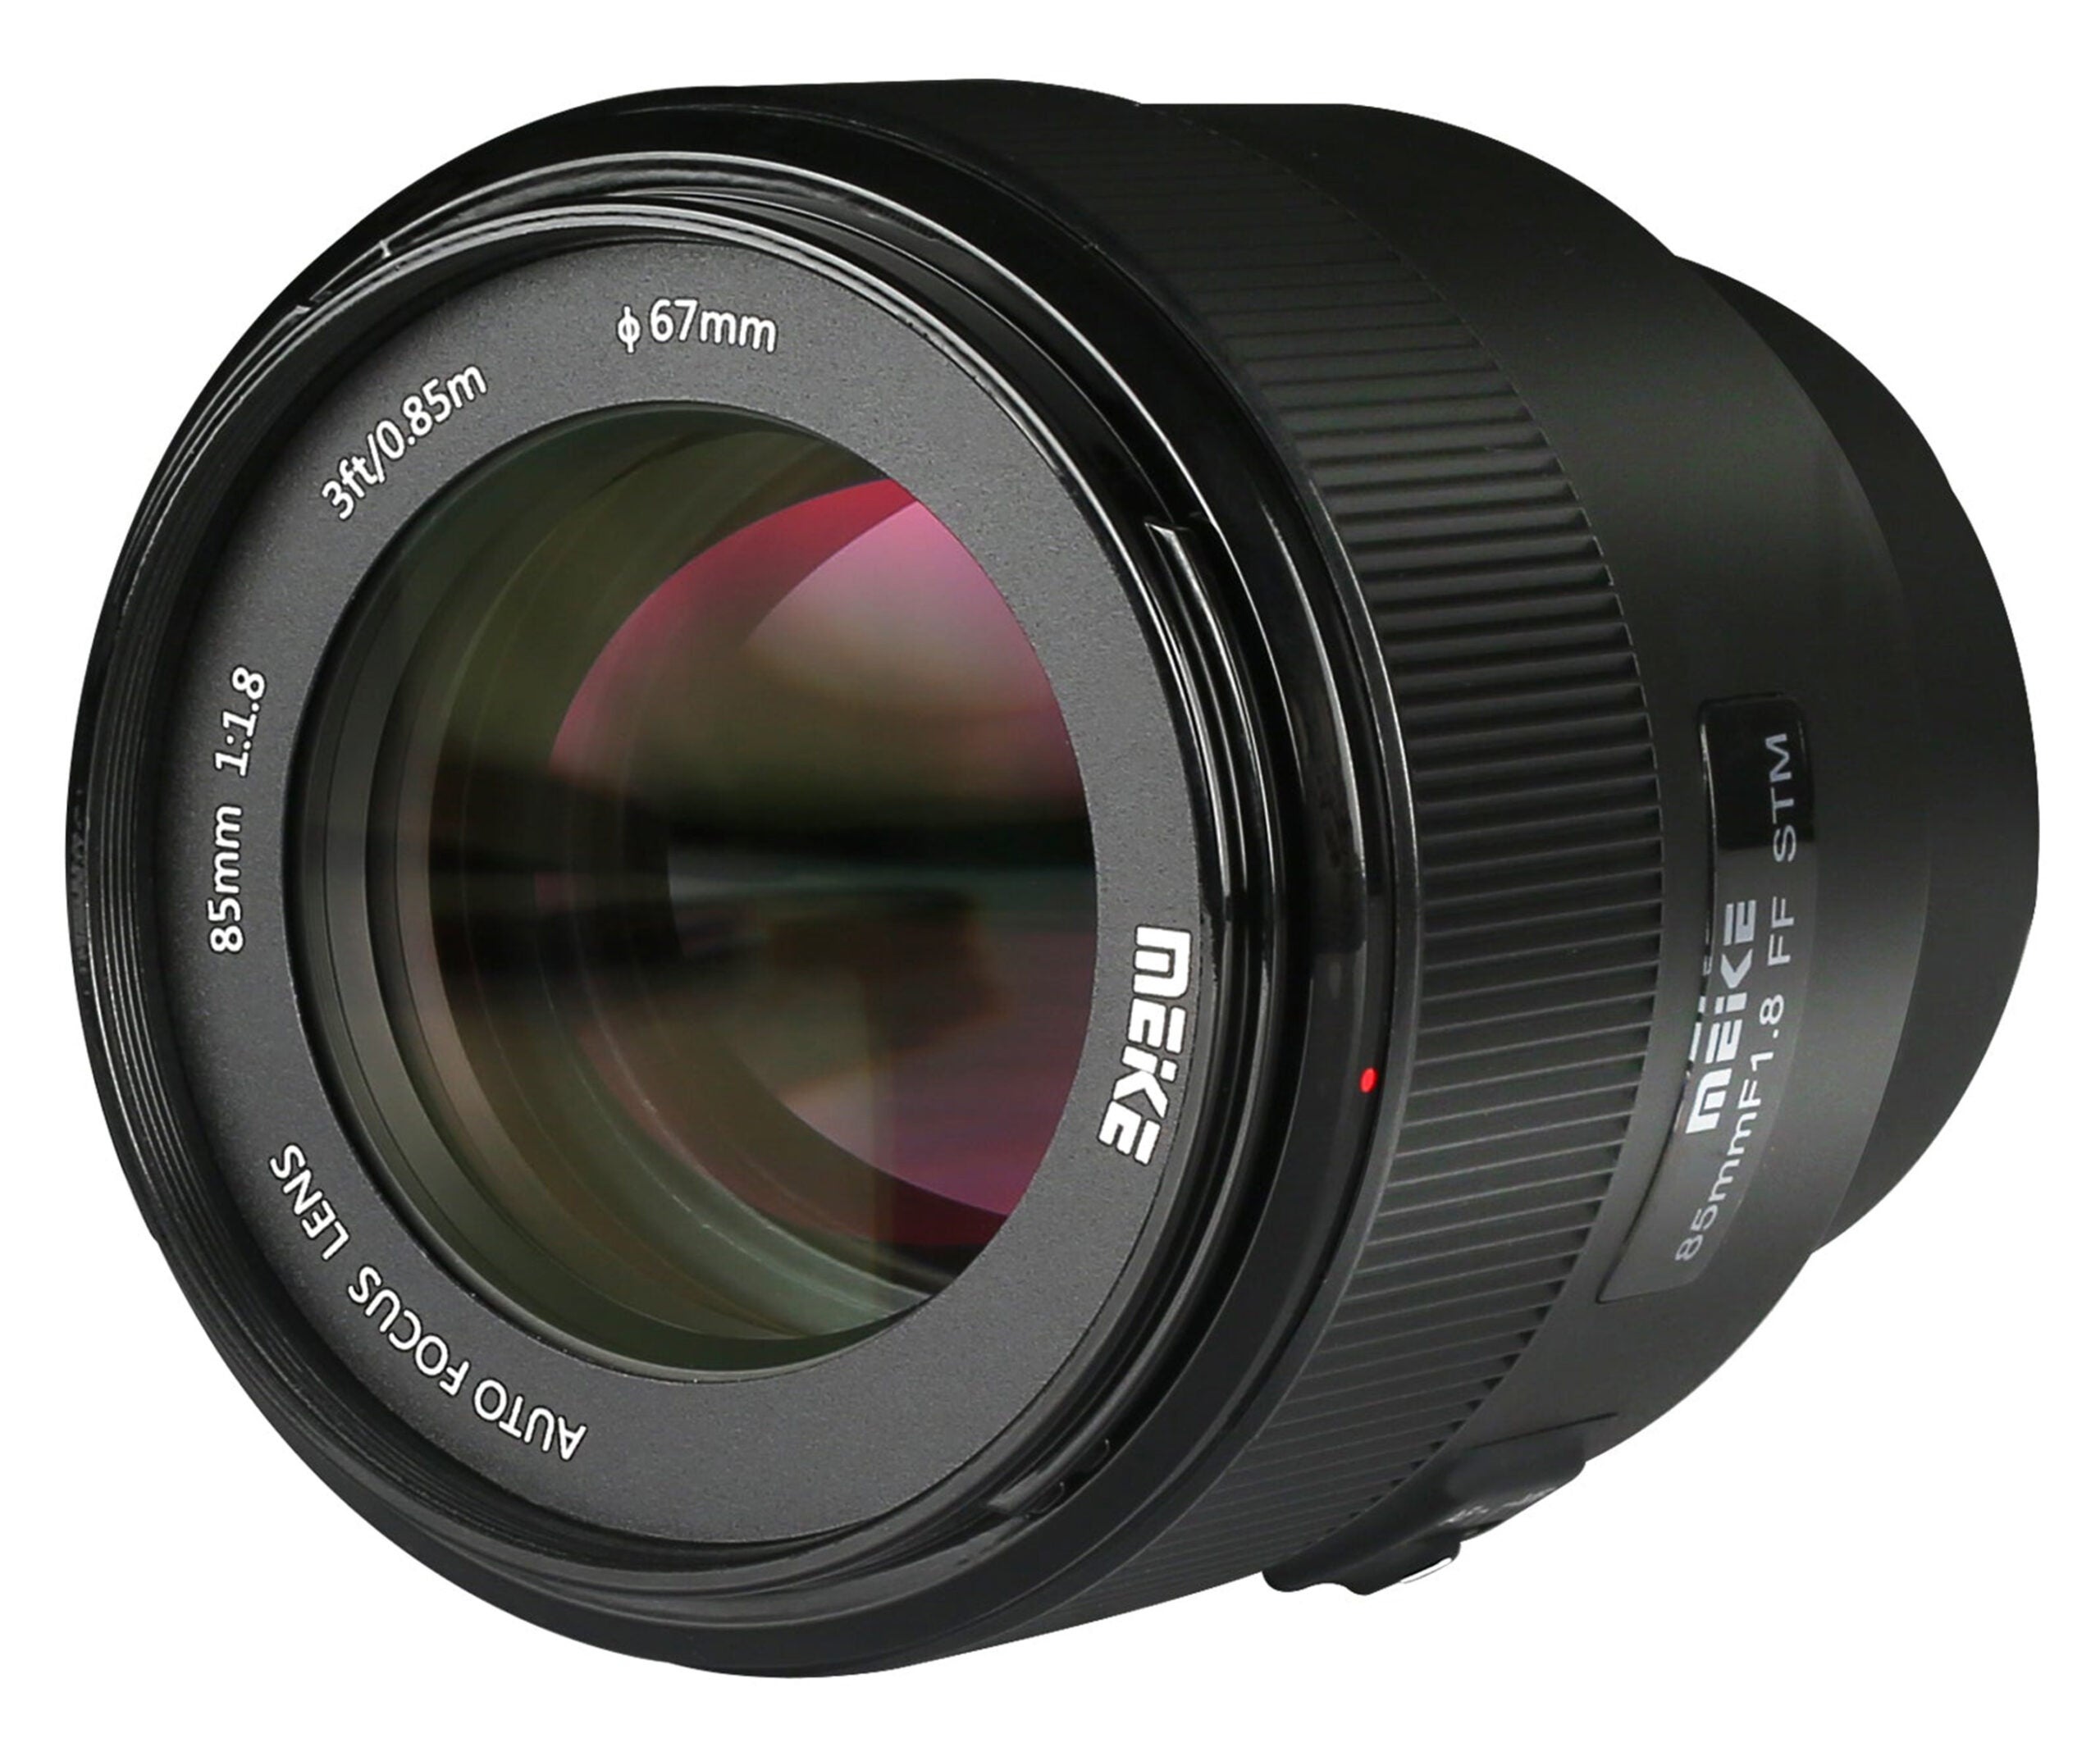 New gear: Meike 85mm f/1.8 costs just $200 | Popular Photography